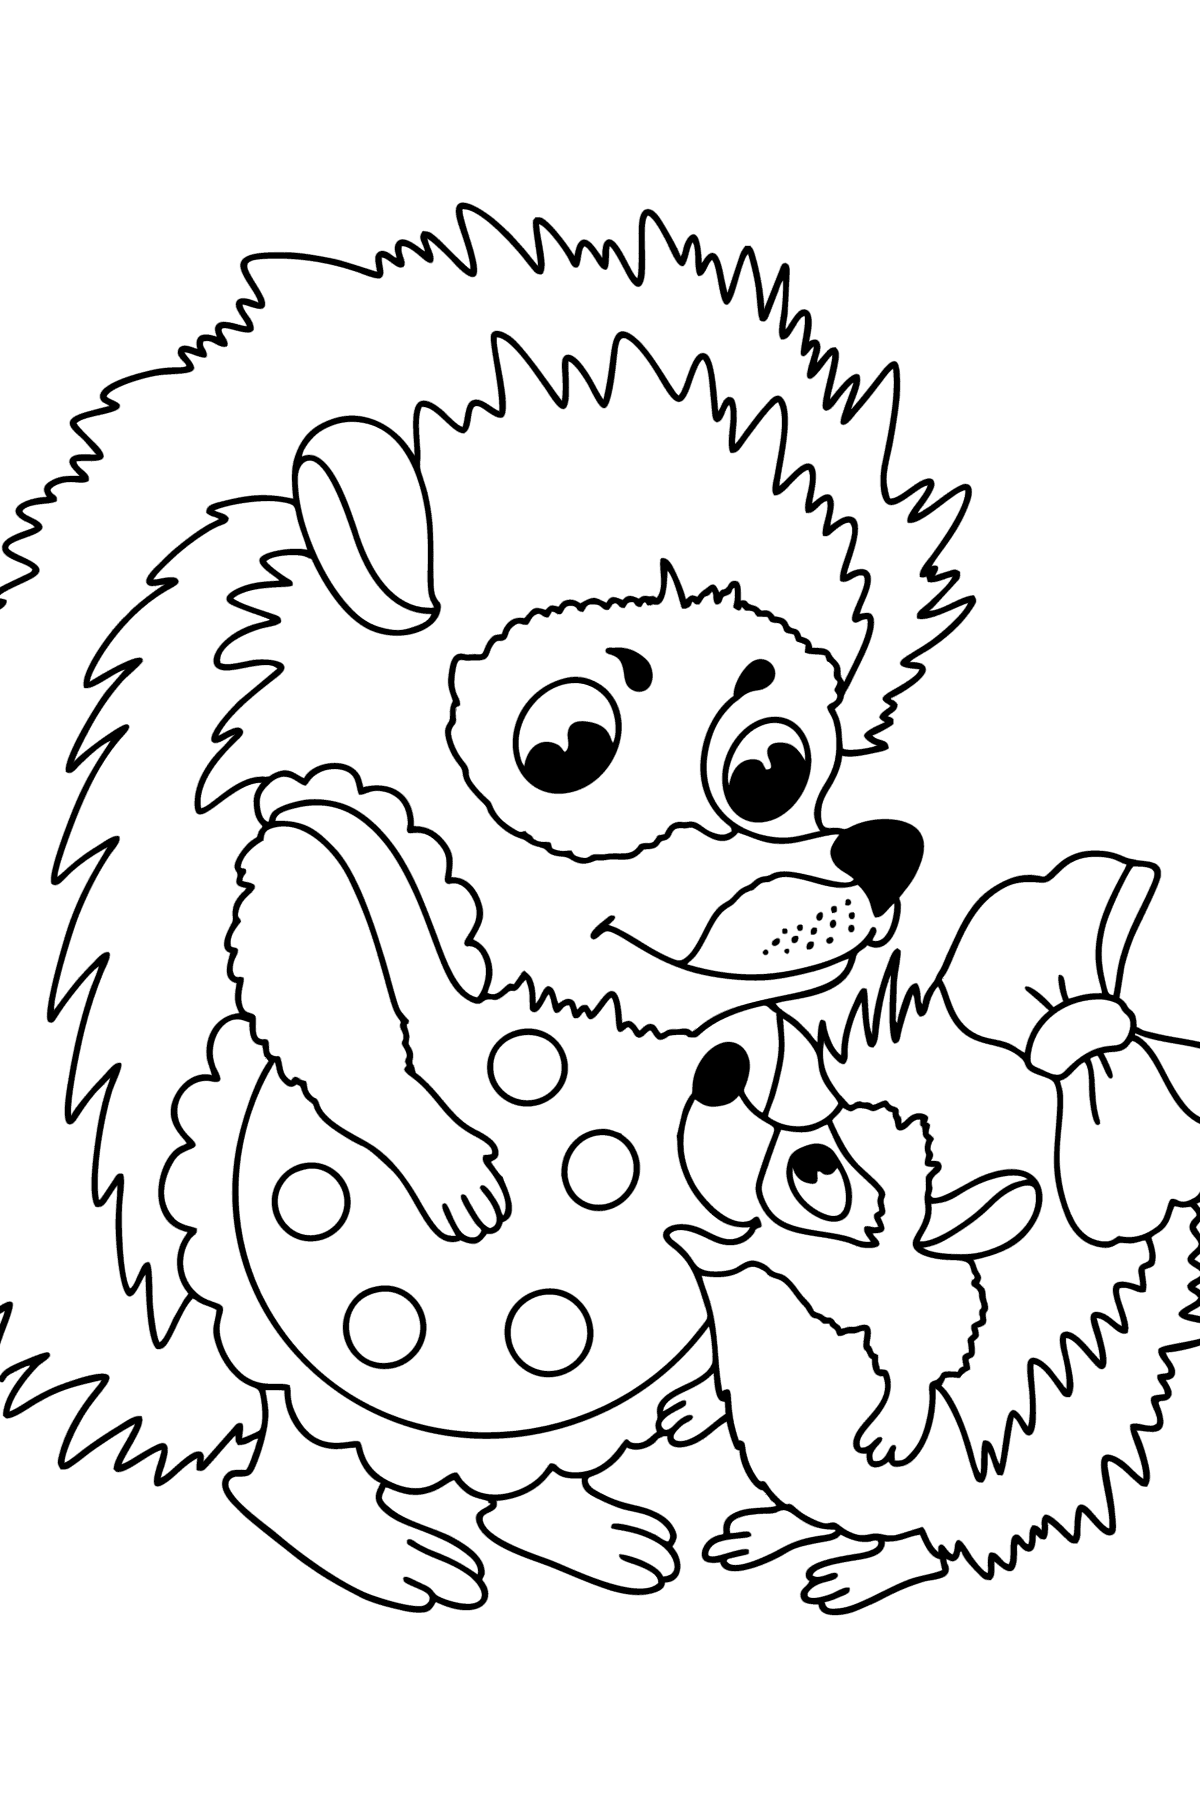 Hedgehogs mom and baby сoloring page - Coloring Pages for Kids